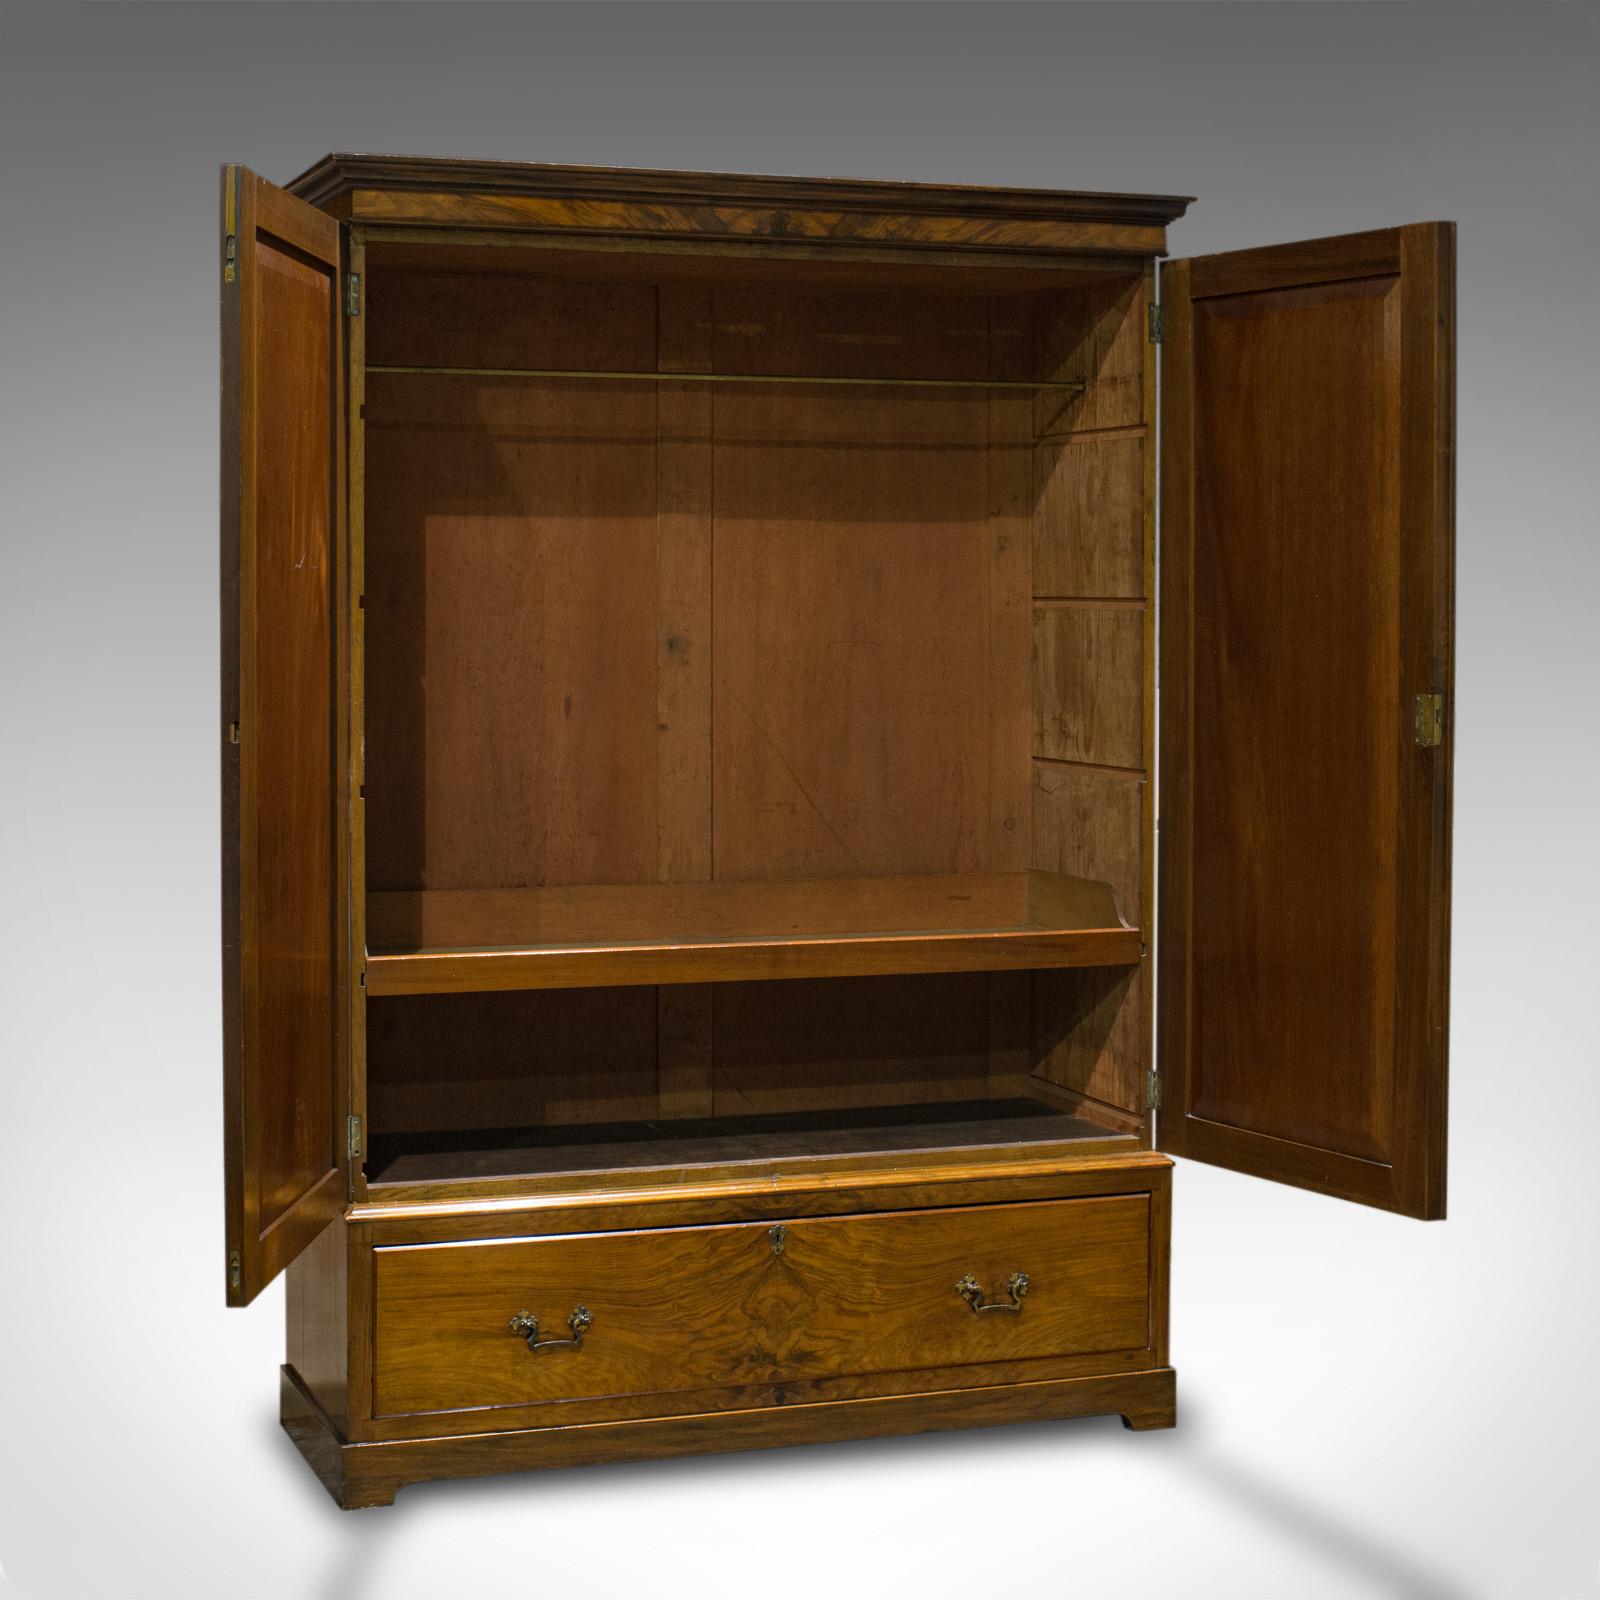 This is an antique linen press. A French, walnut wardrobe with hanging rail and dating to the late 19th century, circa 1900.

Classic proportion and continental Elan
Displays a desirable aged patina and lustre
Select walnut shows wonderful grain